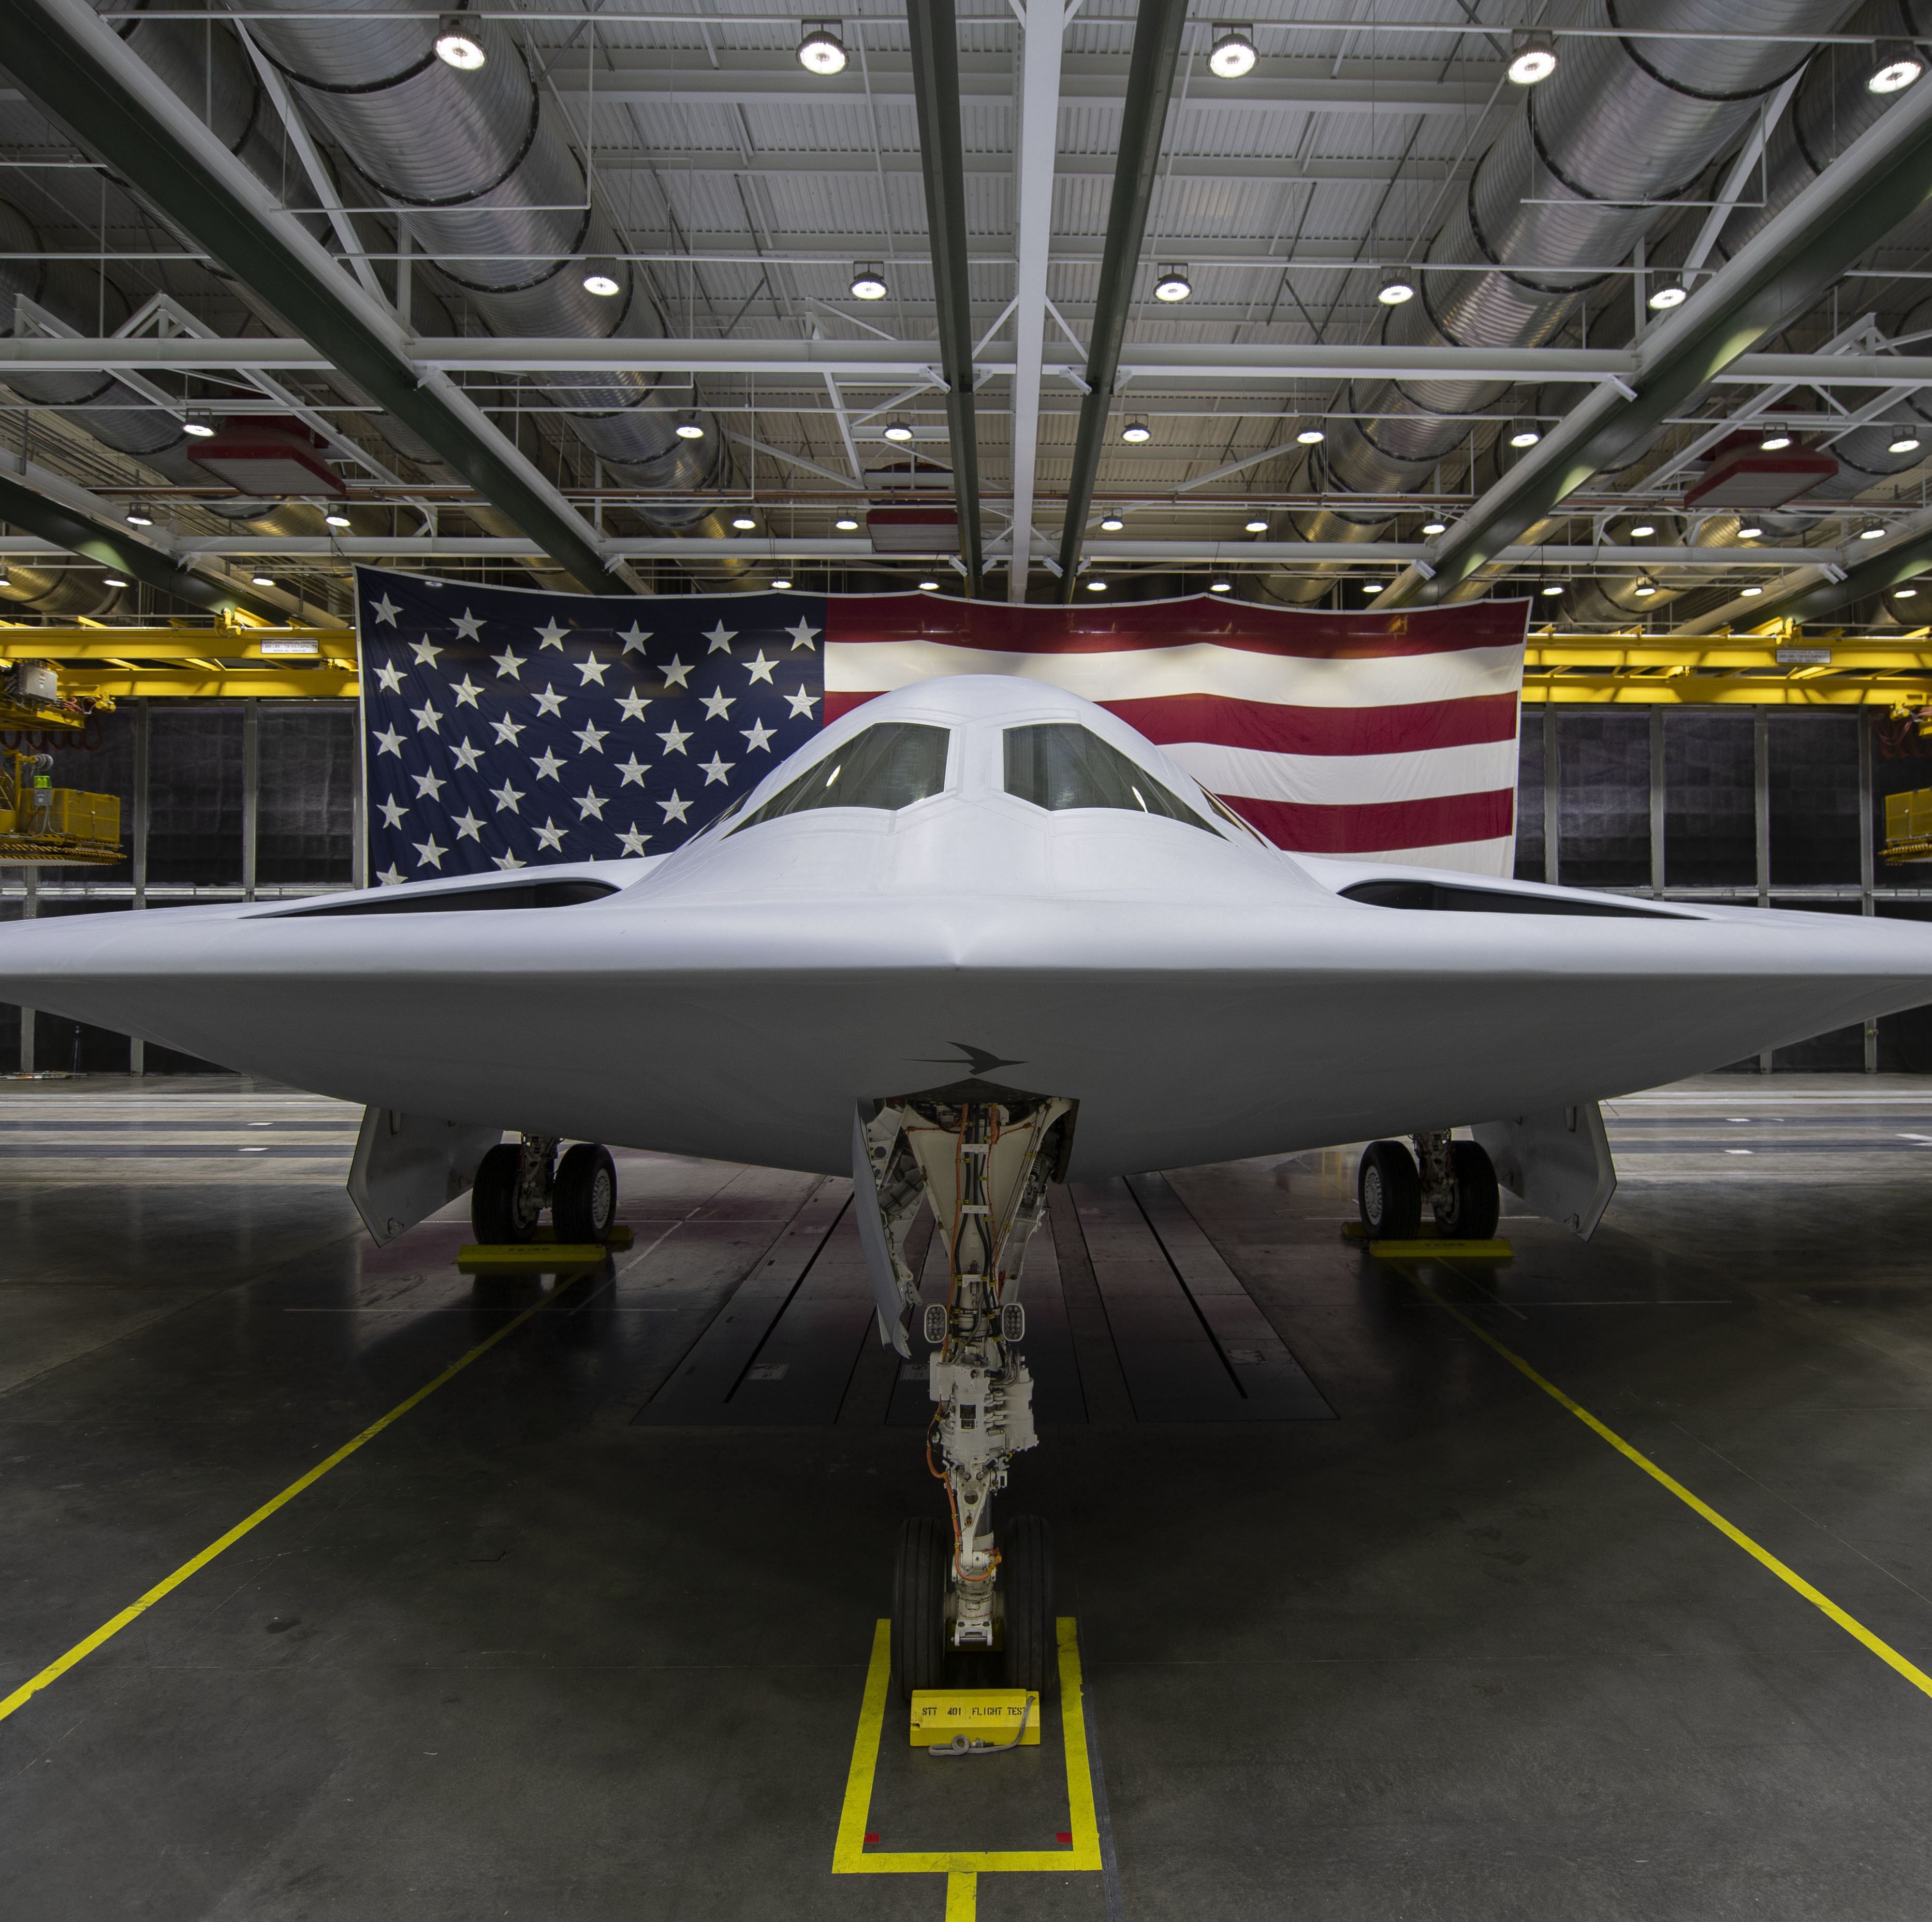 The First Sixth-Generation Aircraft Ever, the B-21 Raider Is 